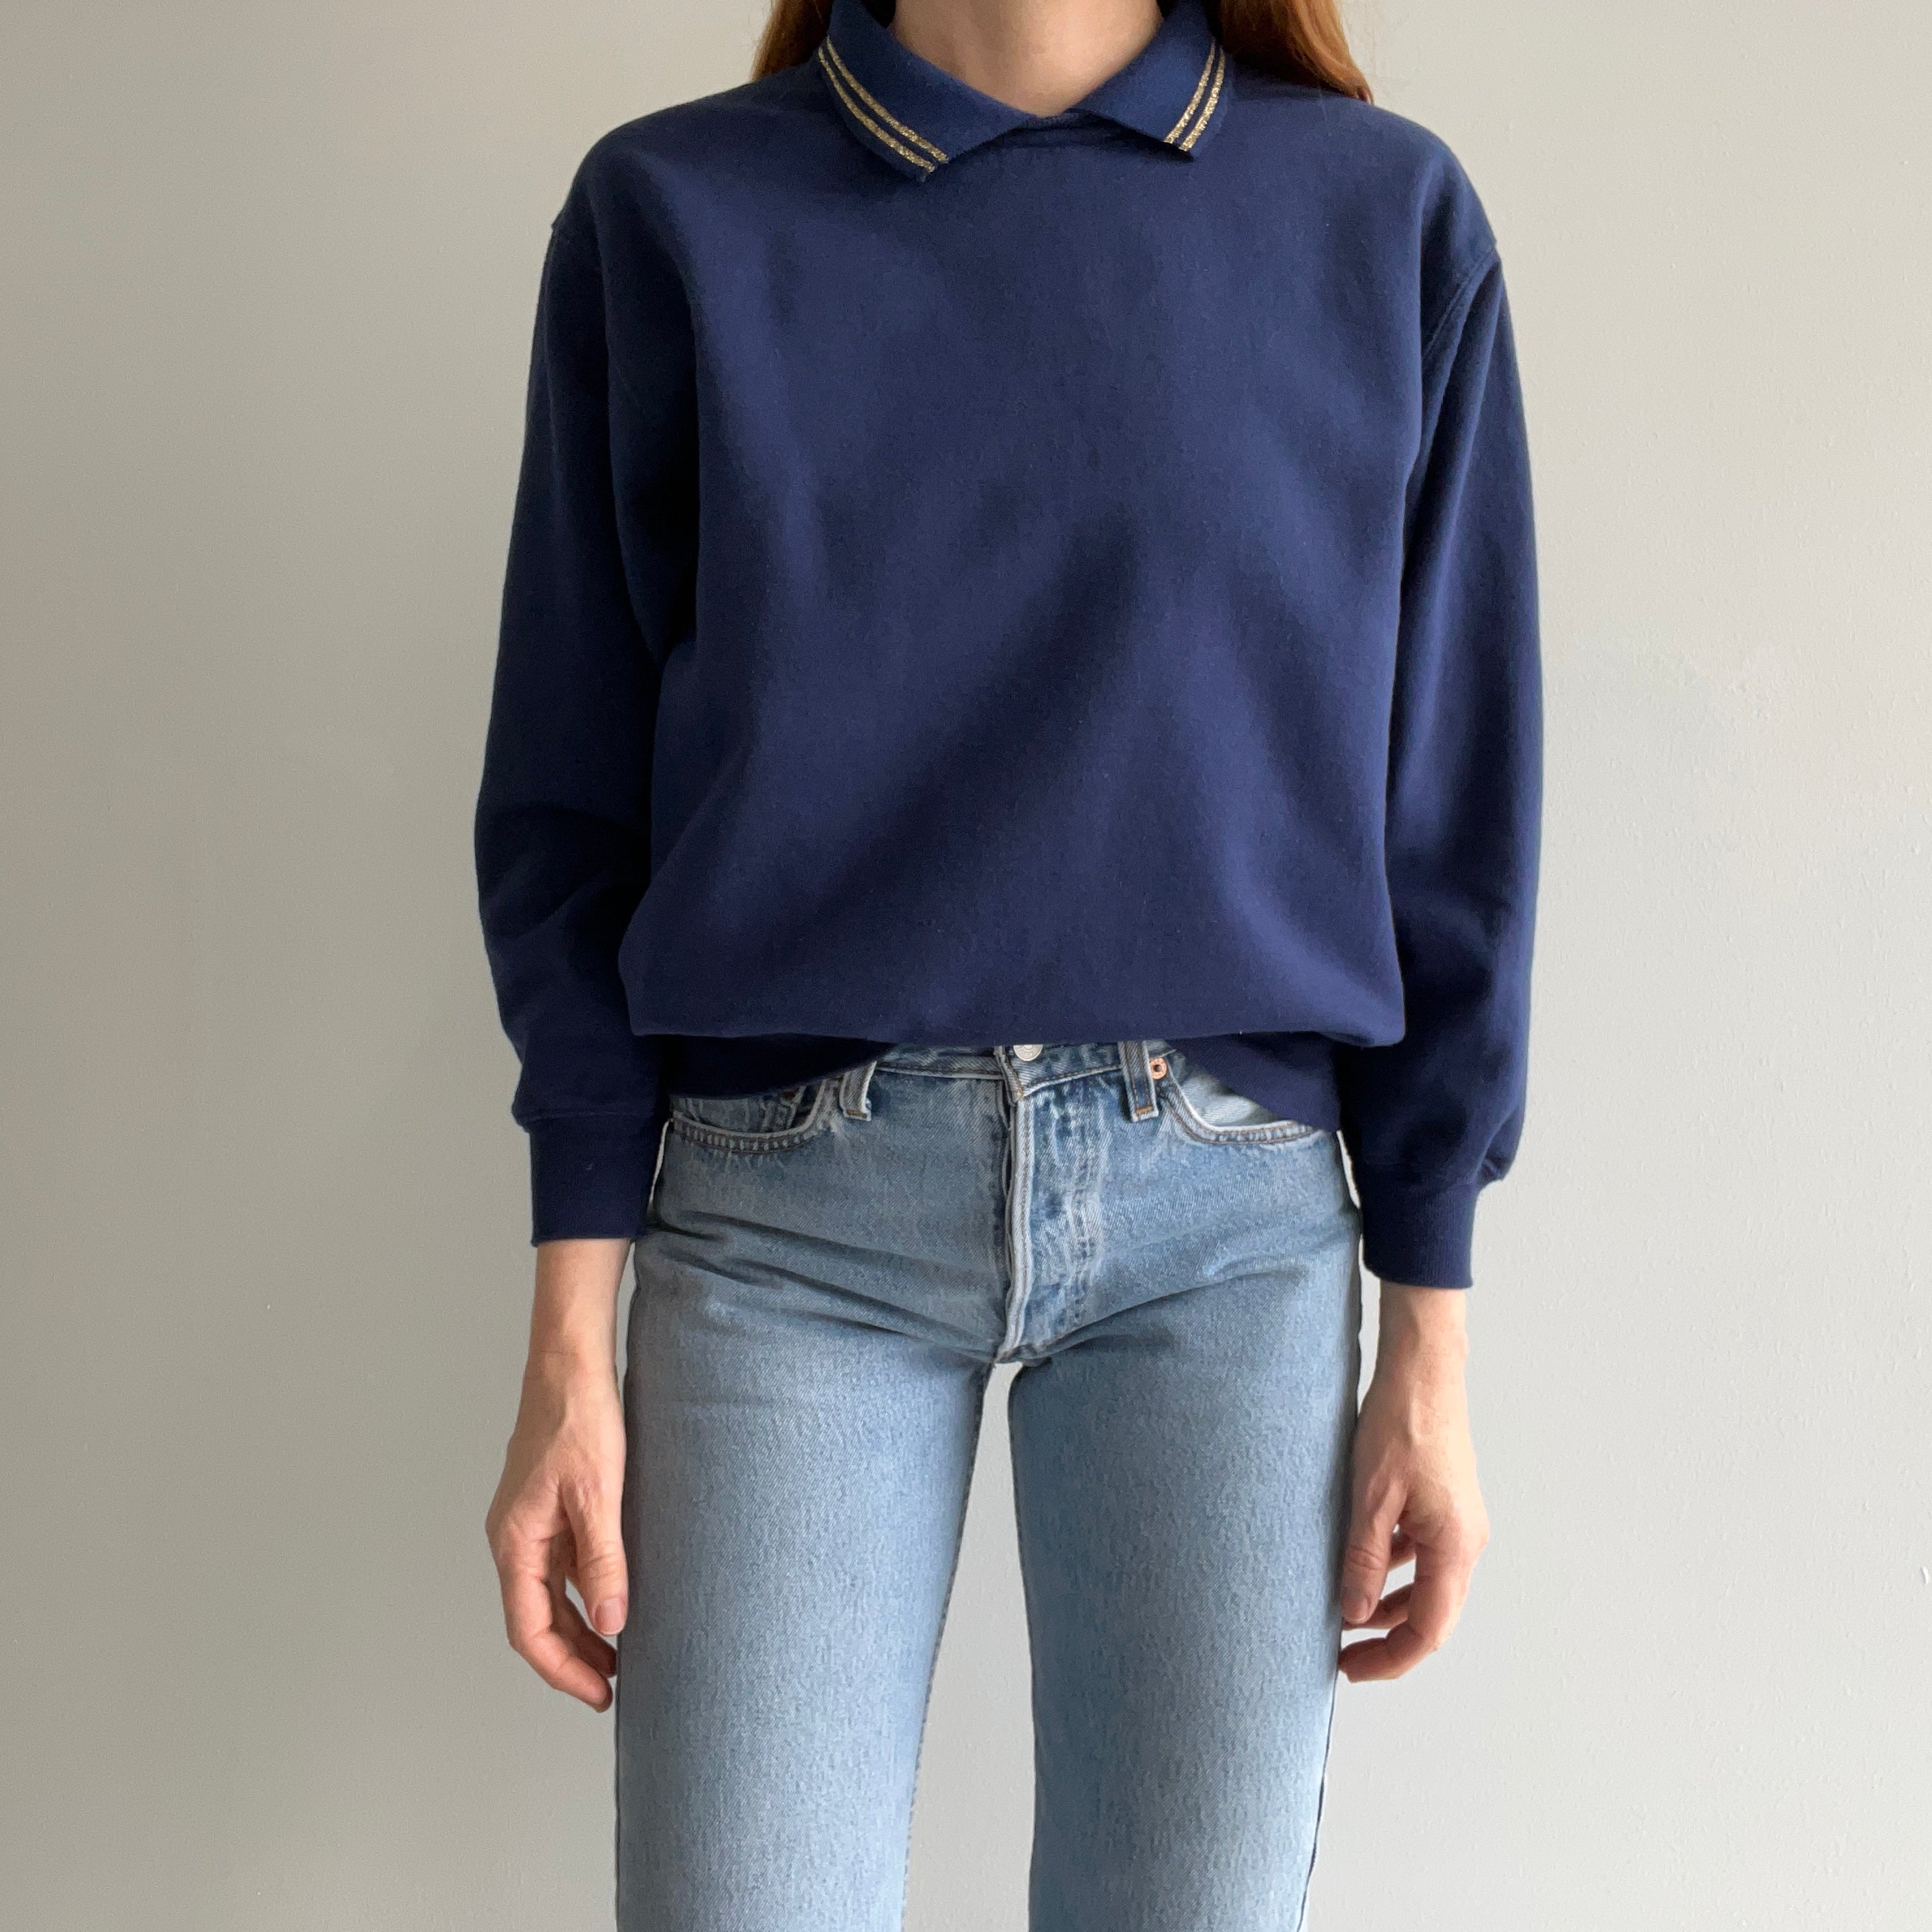 1980s Collared Sweatshirt For Extra Flair